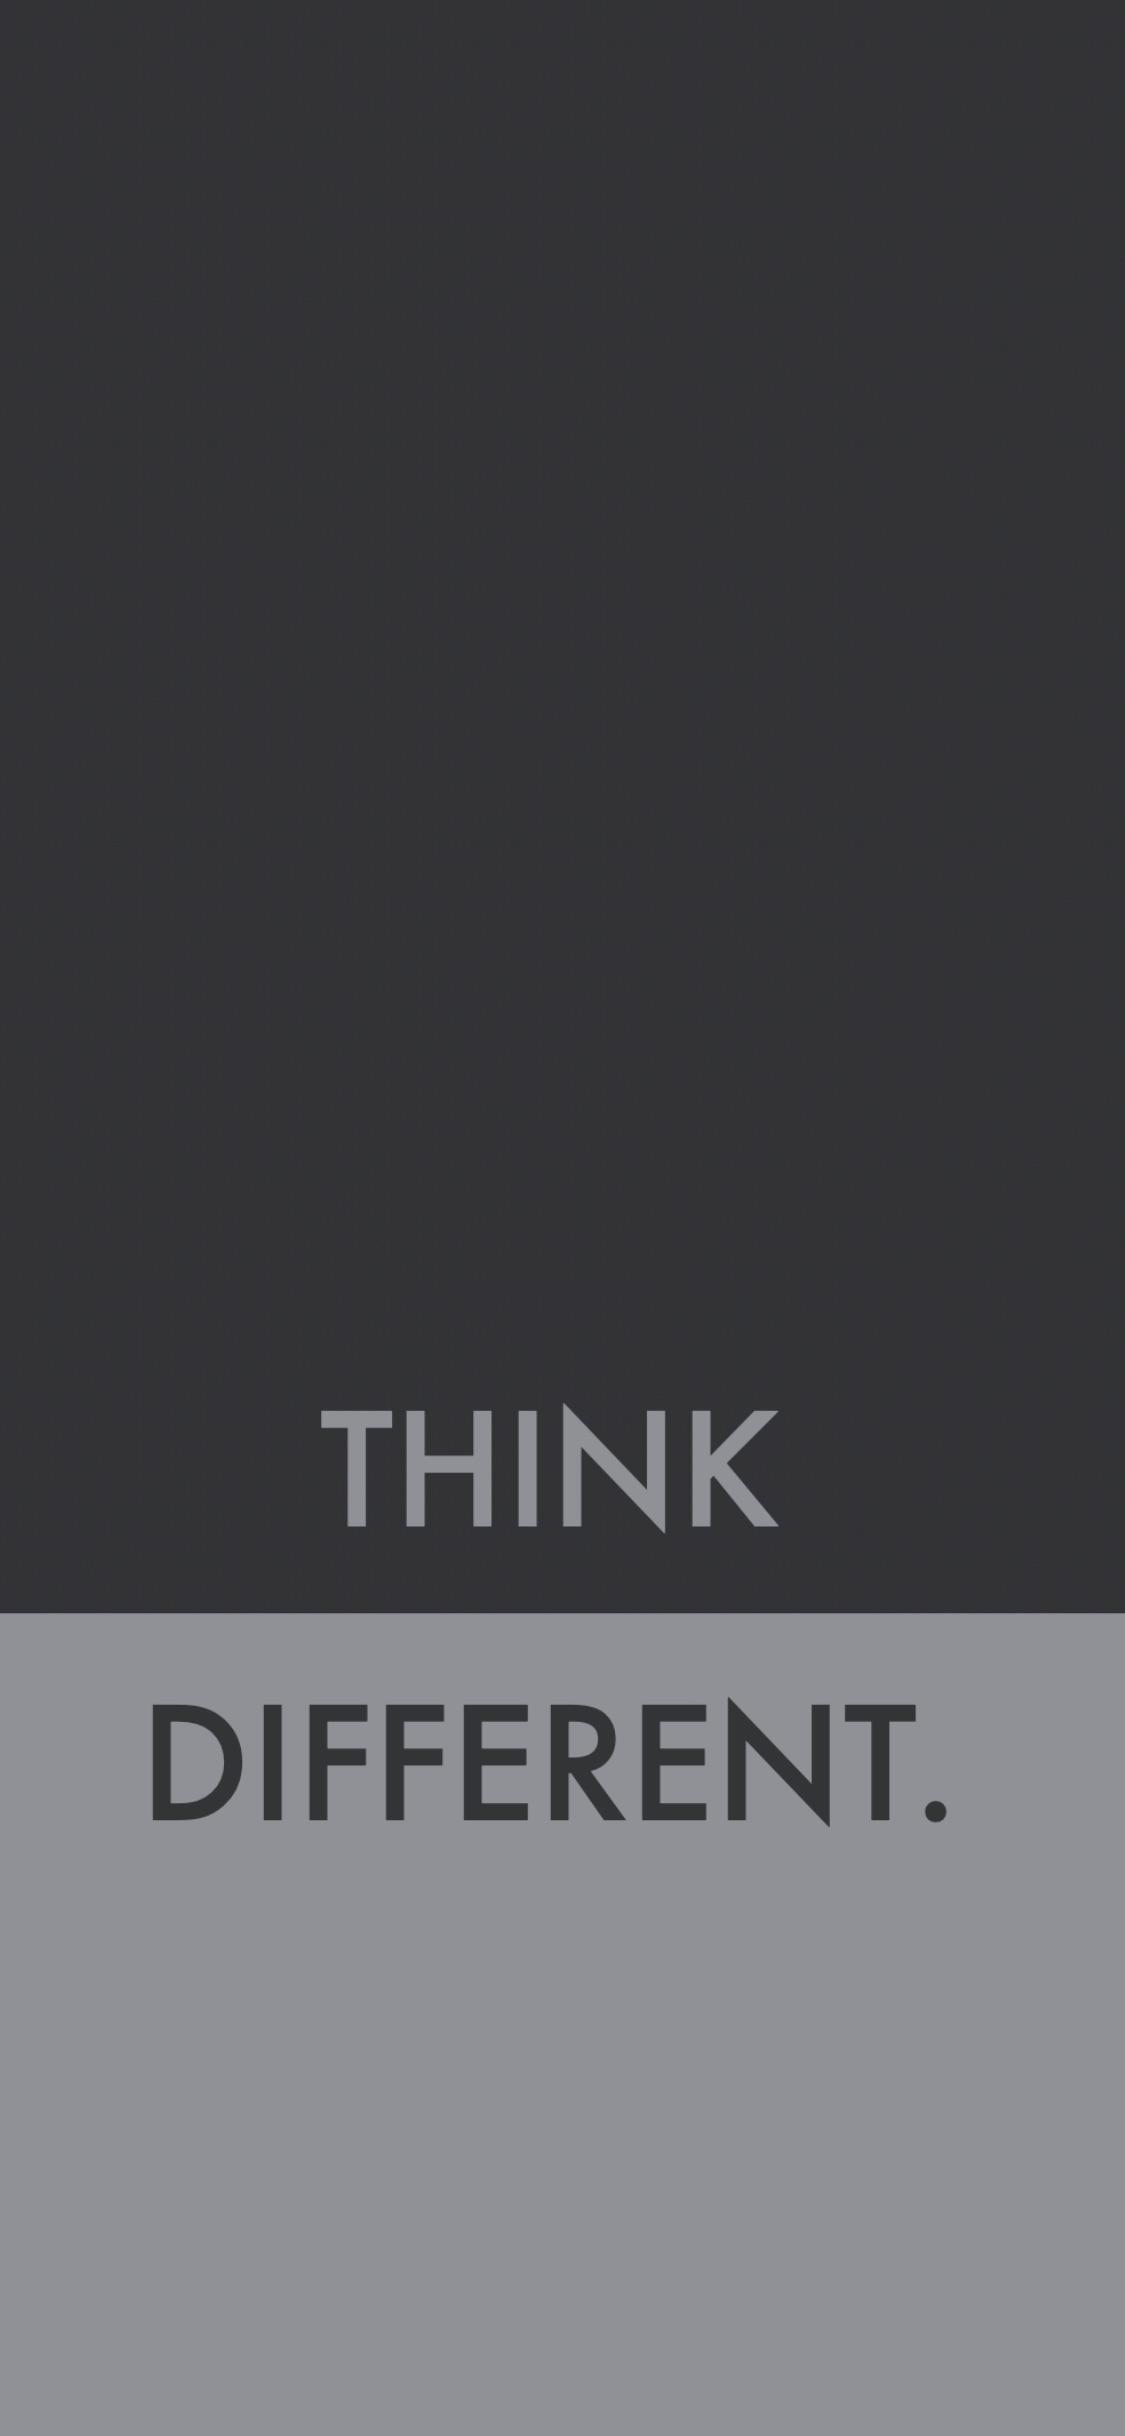 Think Different Wallpaper For Iphone - HD Wallpaper 